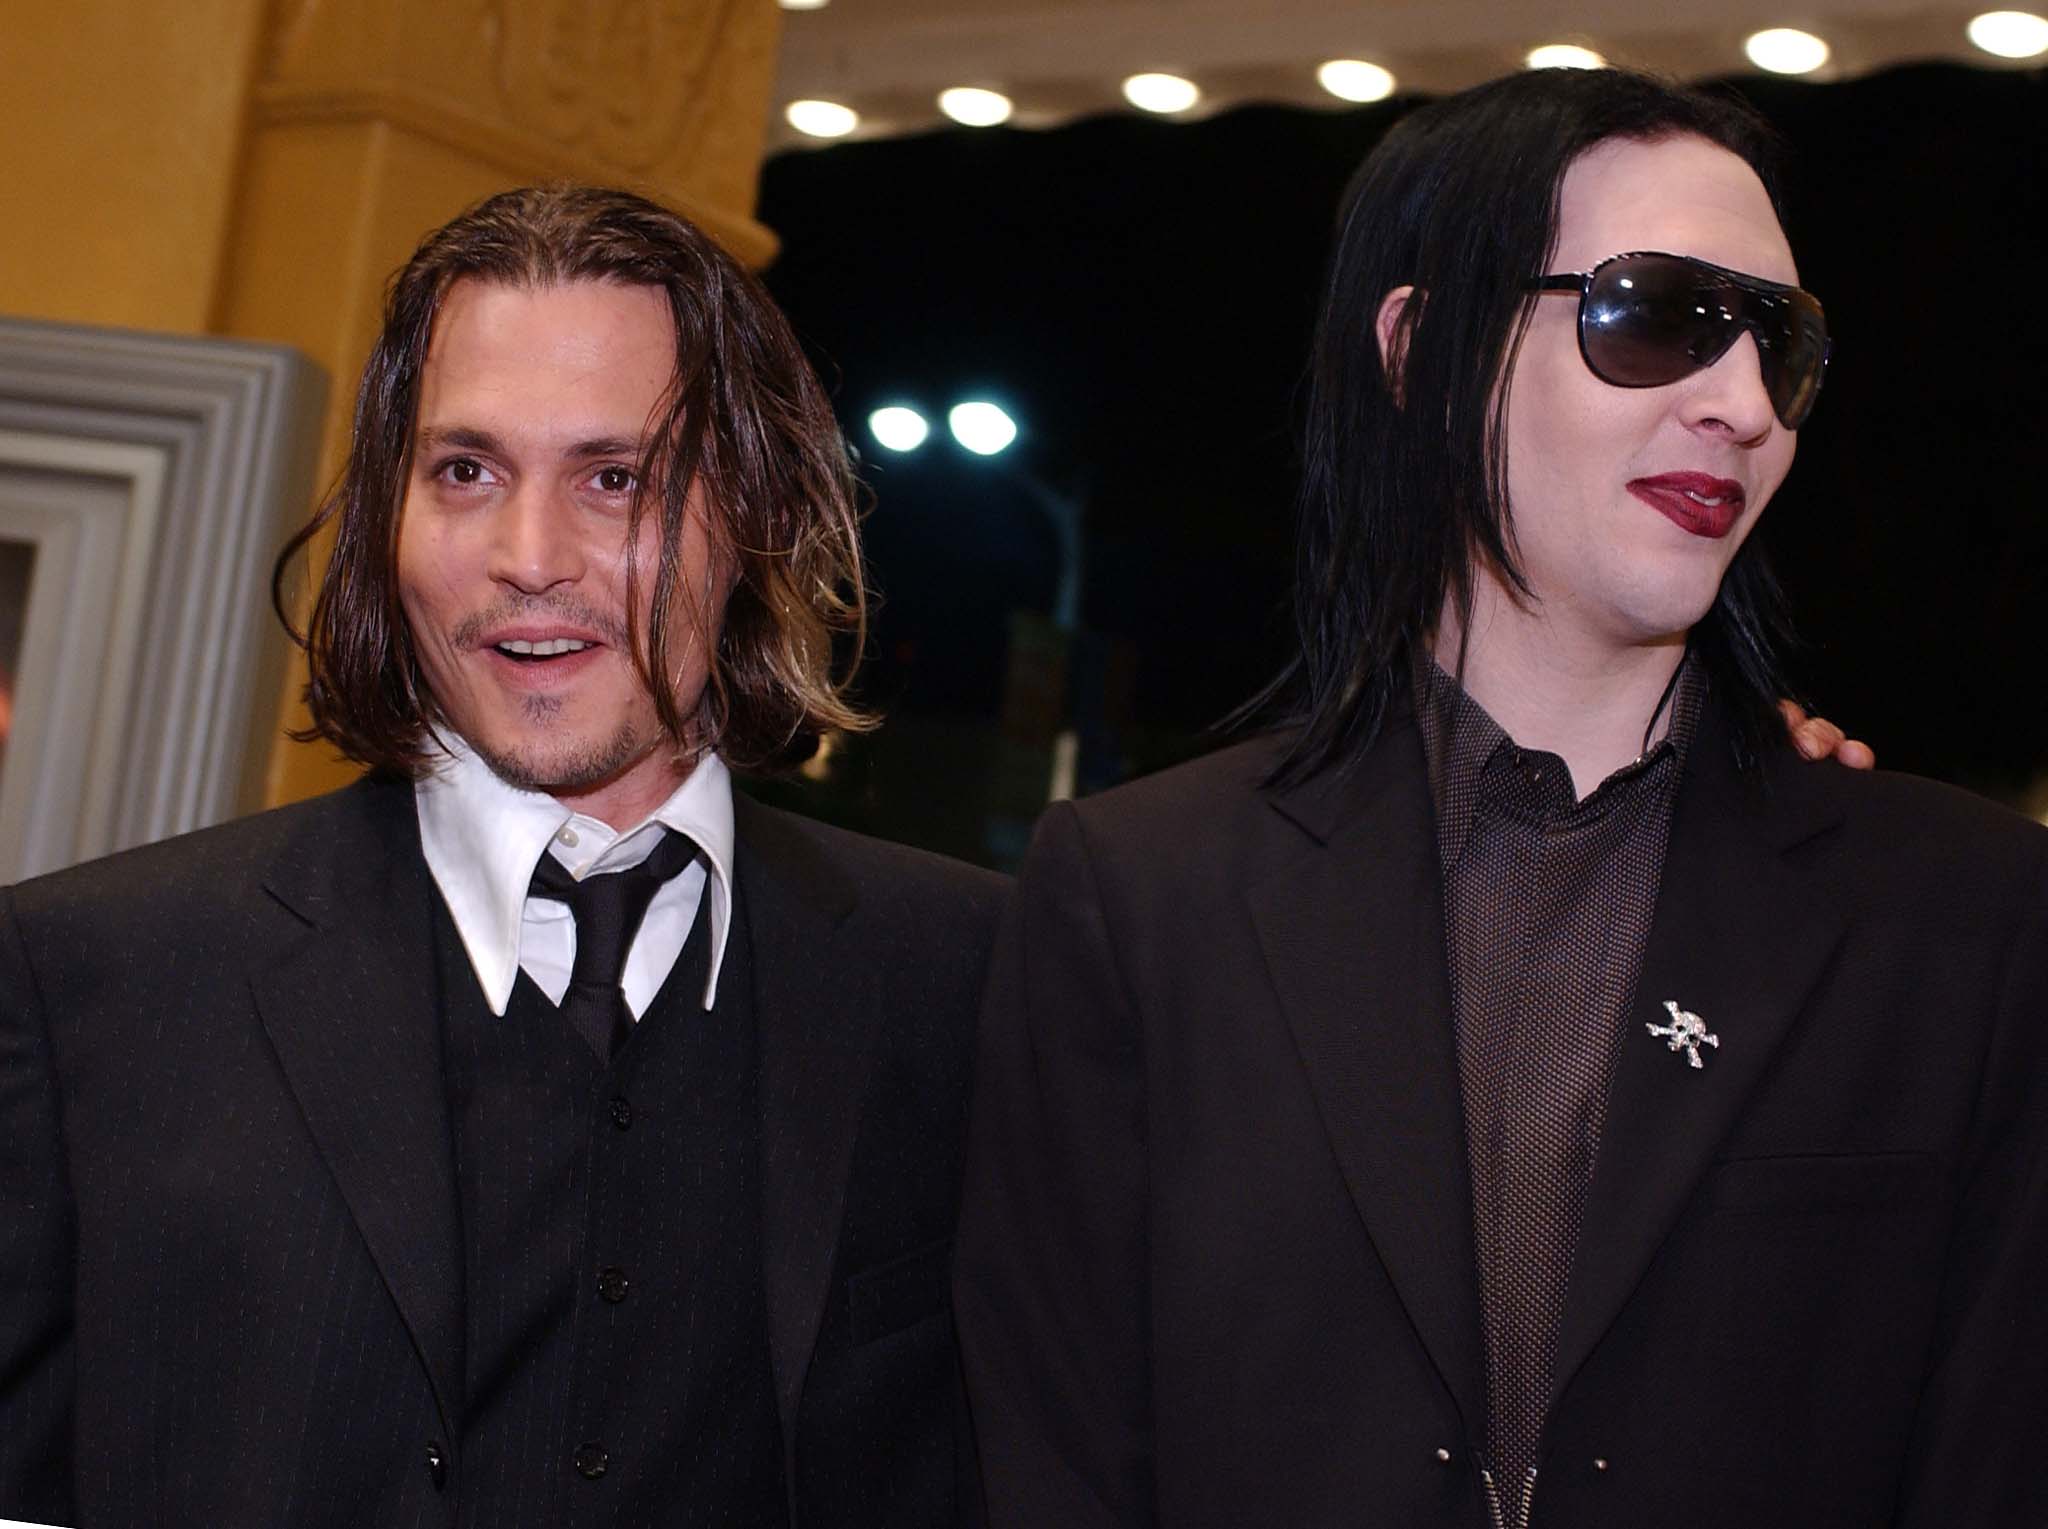 Johnny Depp and Marilyn Manson, who covered Carly Simon's "You're So Vain" together, wearing suits